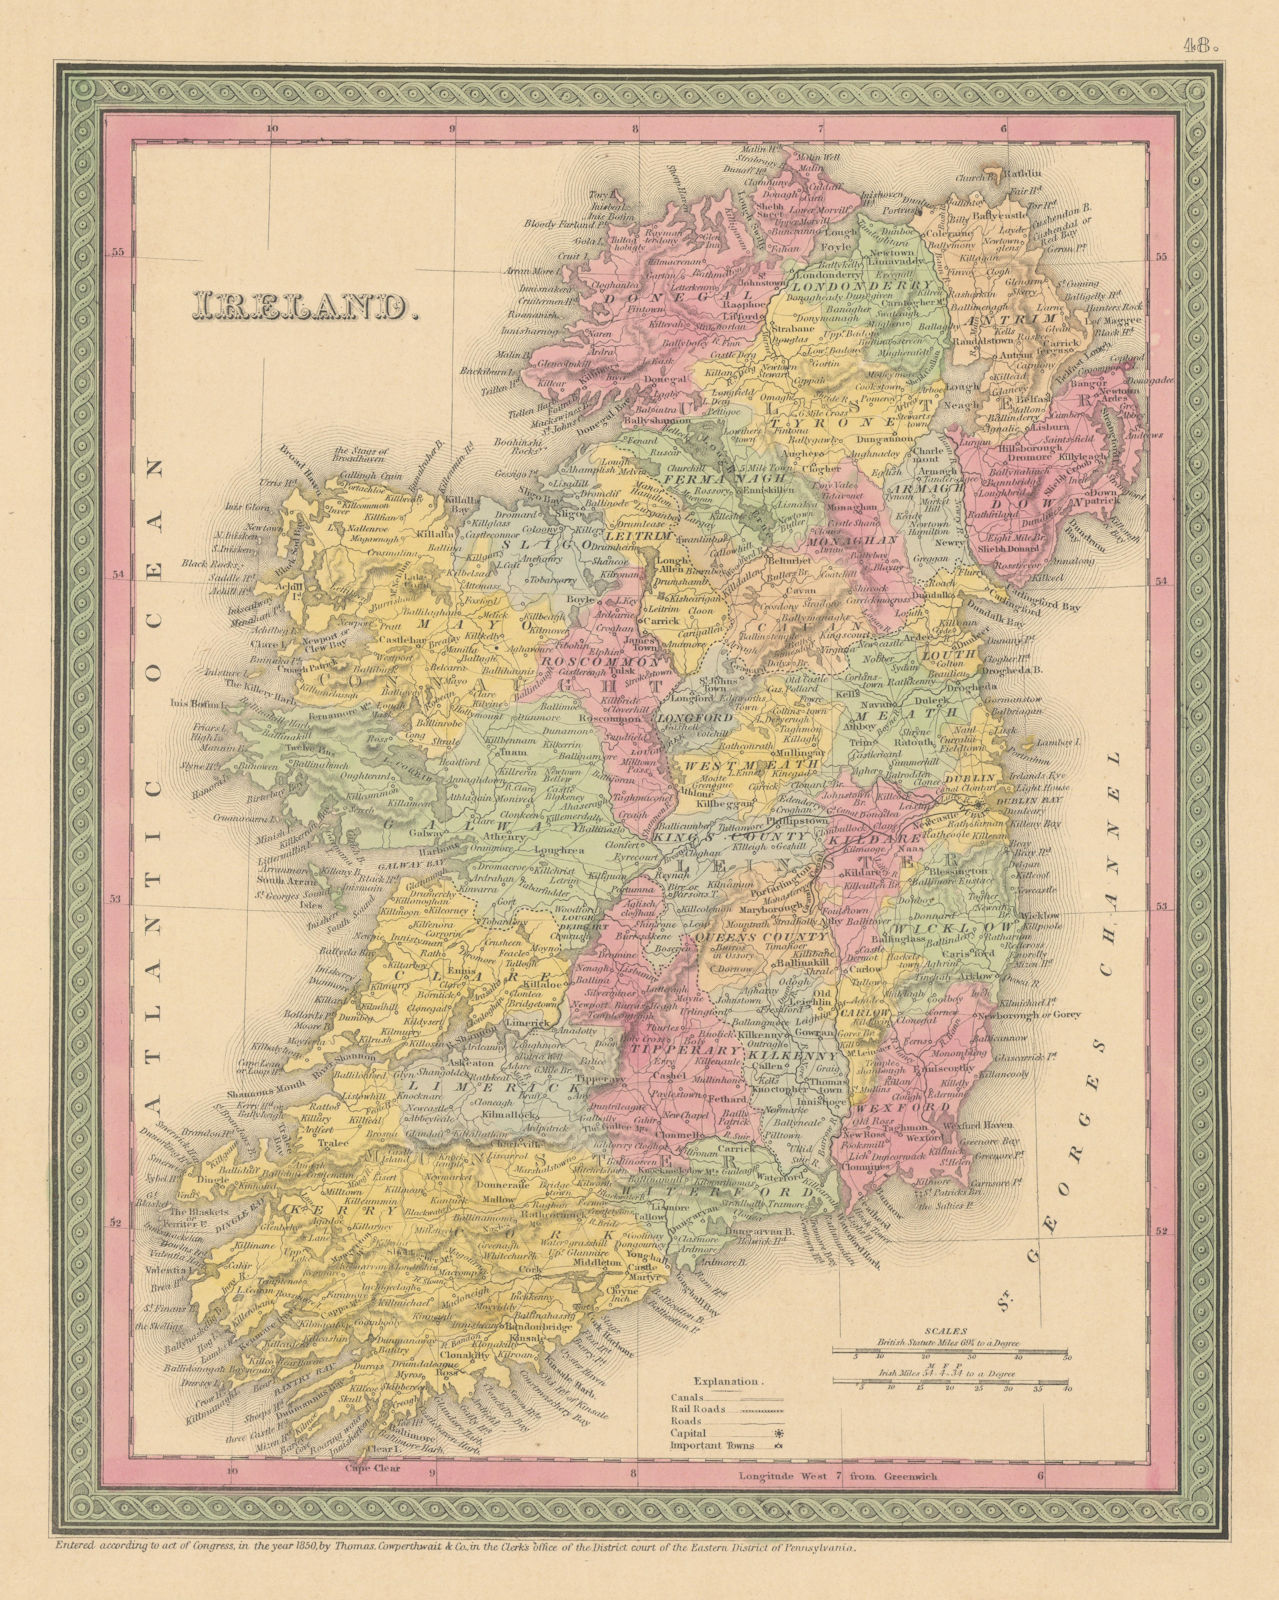 Associate Product Ireland. Counties & canals. THOMAS, COWPERTHWAIT 1852 old antique map chart